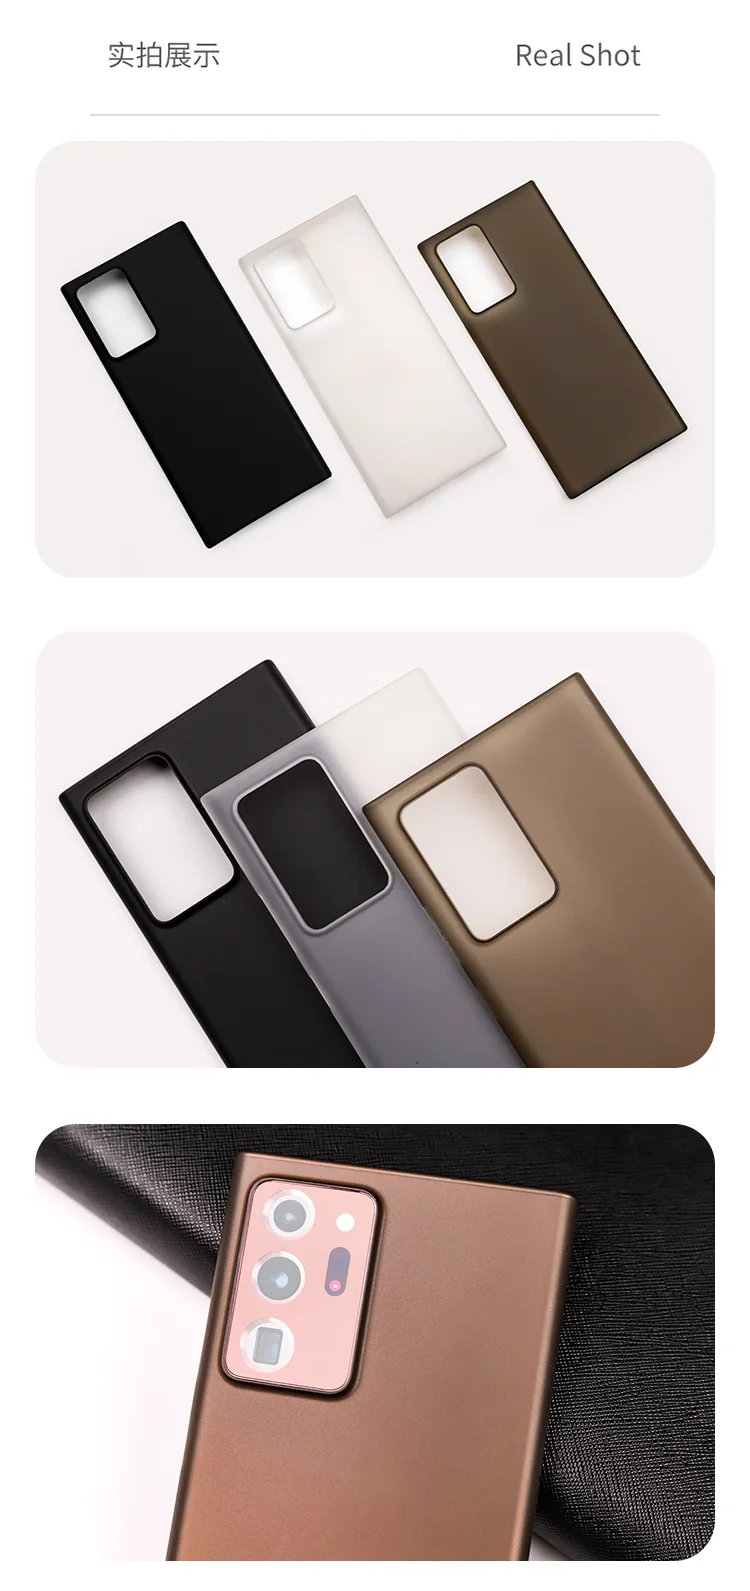 Ultra Thin Matte PP Case For SAMSUNG note 20 ultra Full Cover Hard PC Shockproof Case for SAMSUNG note20 kawaii samsung phone cases